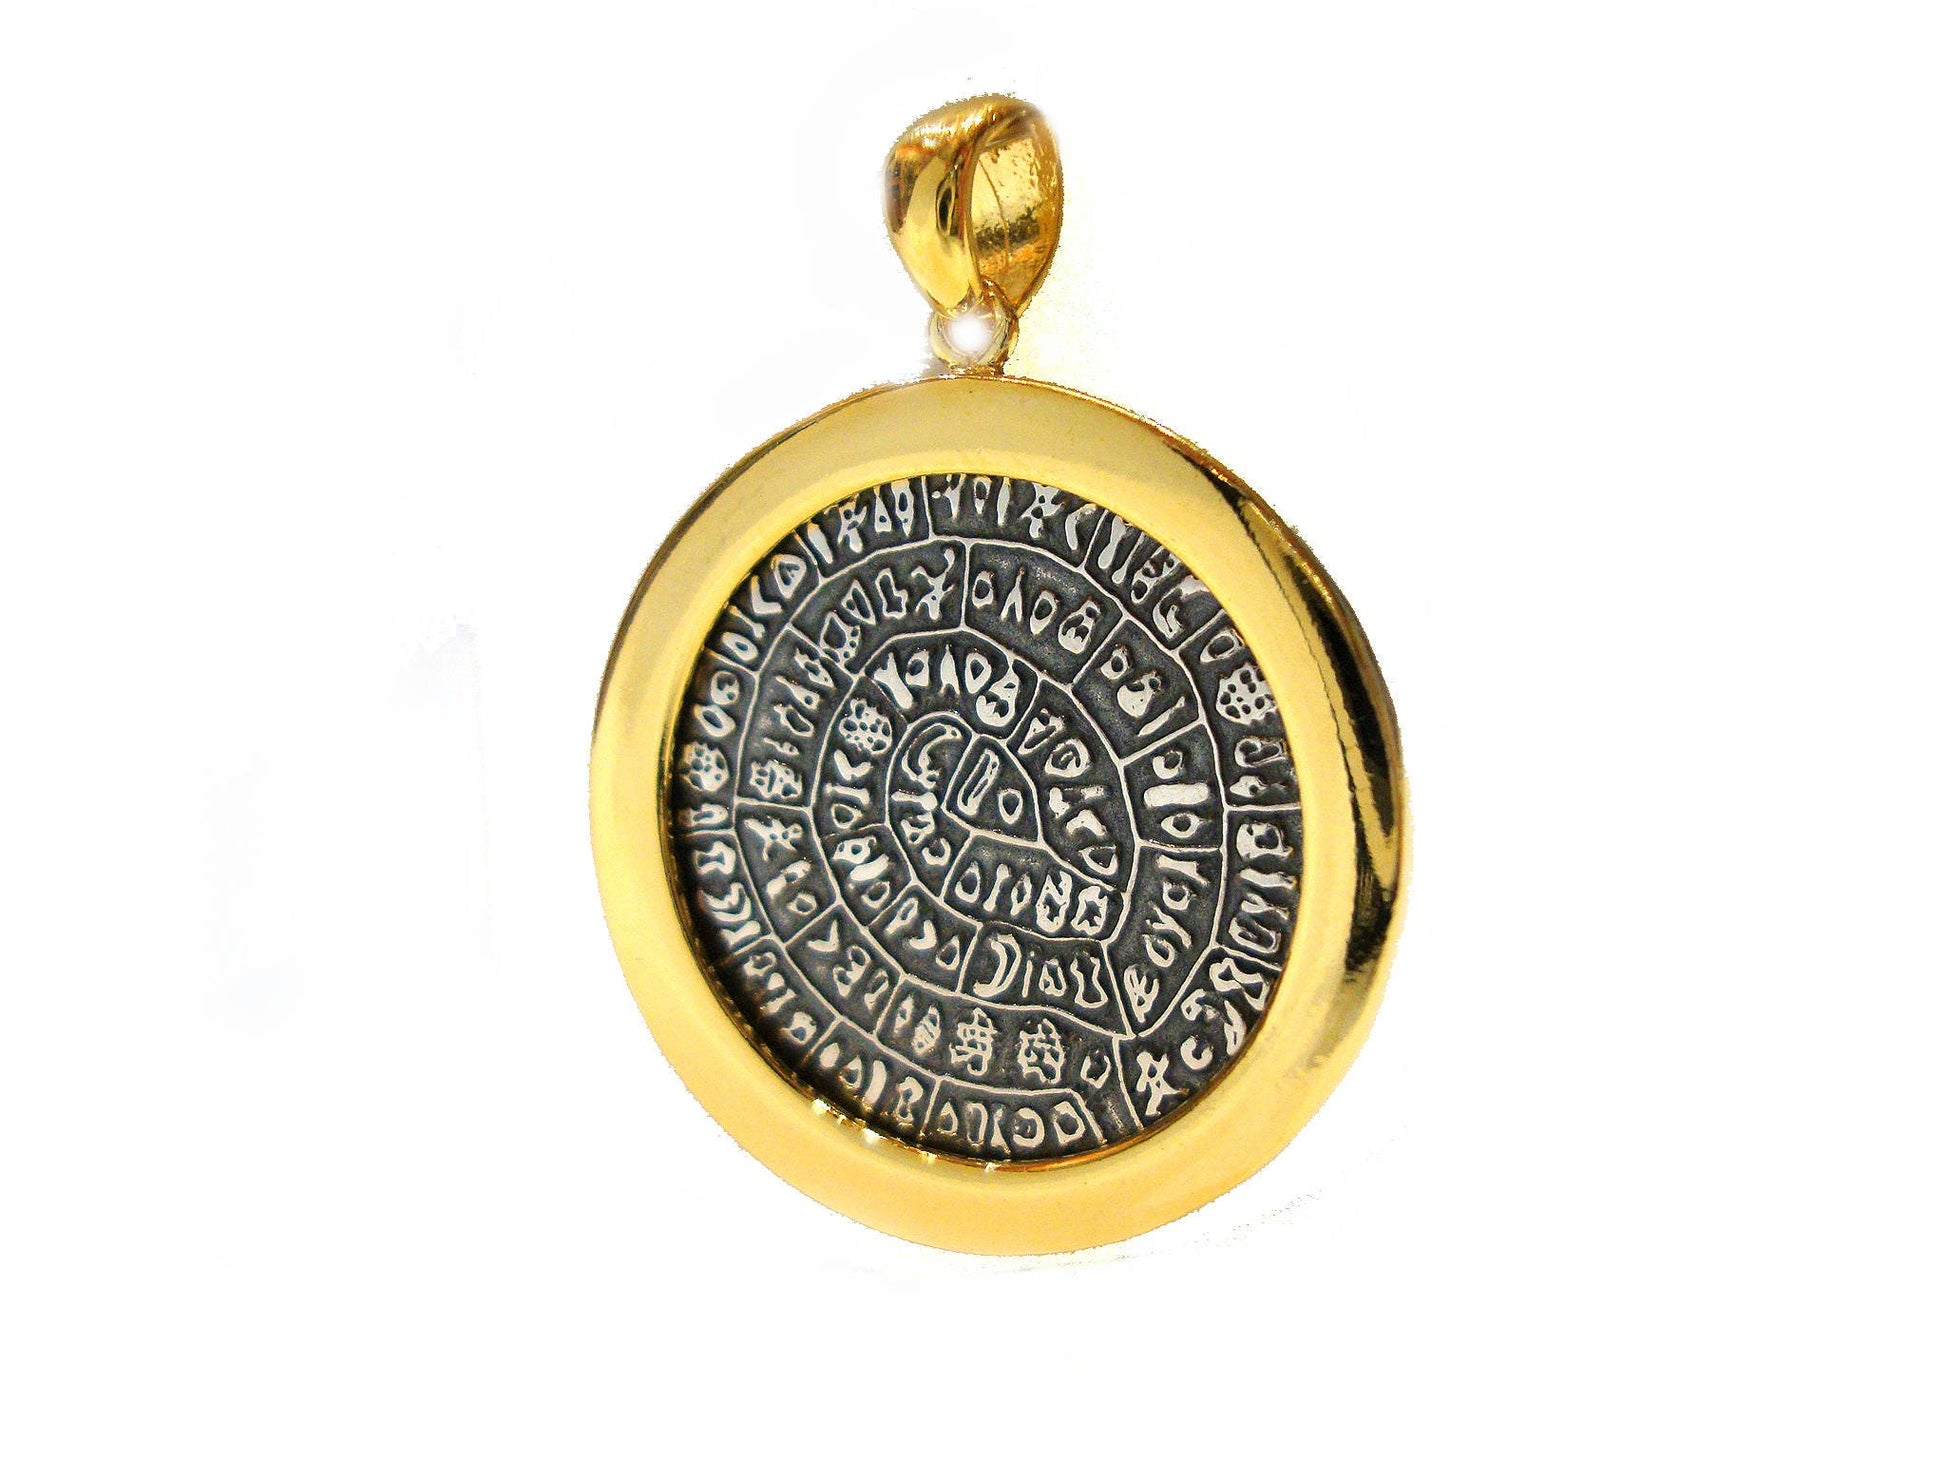 Greek silver pendant with the Phaistos Disc design in 2 colors , gold and silver , measuring 23mm.